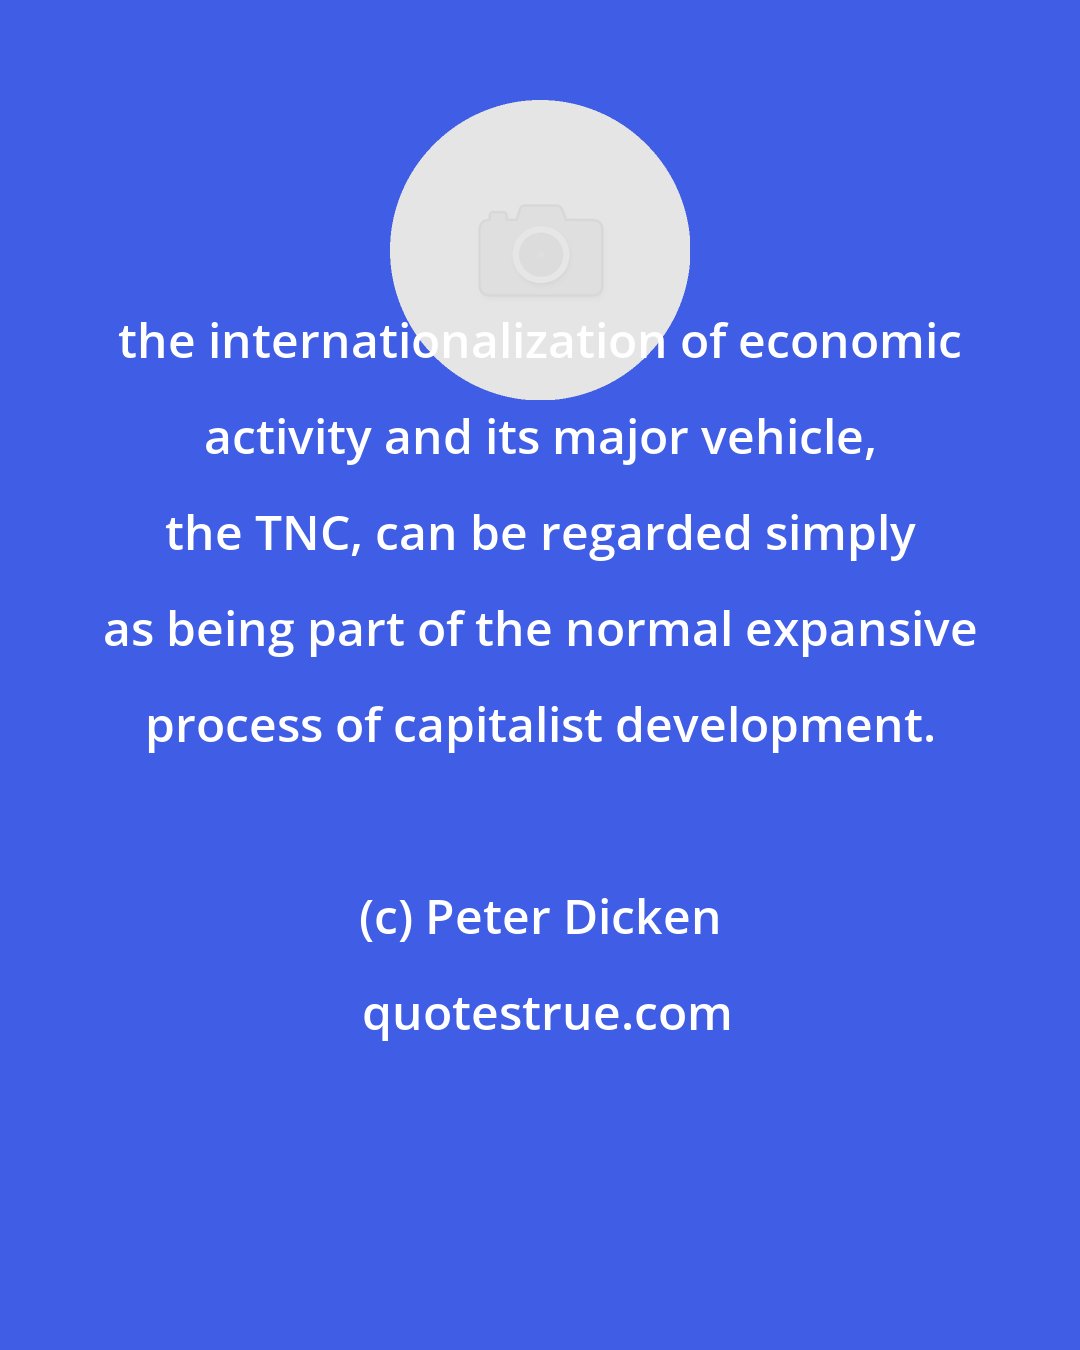 Peter Dicken: the internationalization of economic activity and its major vehicle, the TNC, can be regarded simply as being part of the normal expansive process of capitalist development.